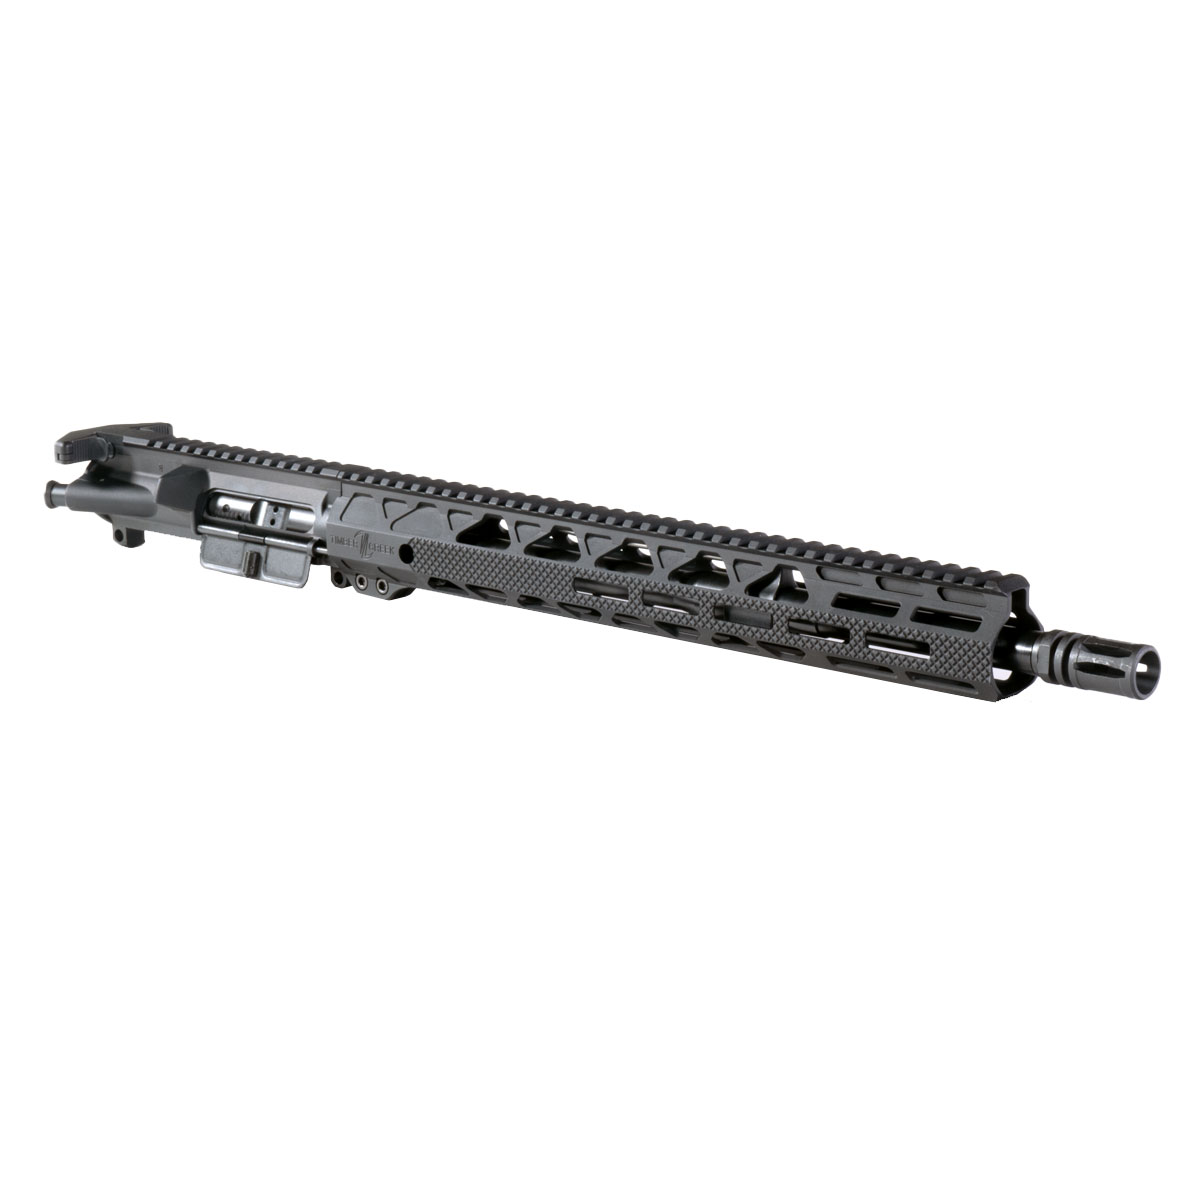 ELITE AR-15 with Timber Creek Greyman Handguard 16.5-inch 5.56 NATO Nitride Rifle Complete Upper Build with X2 Dev Group Jackal X Charging Handle